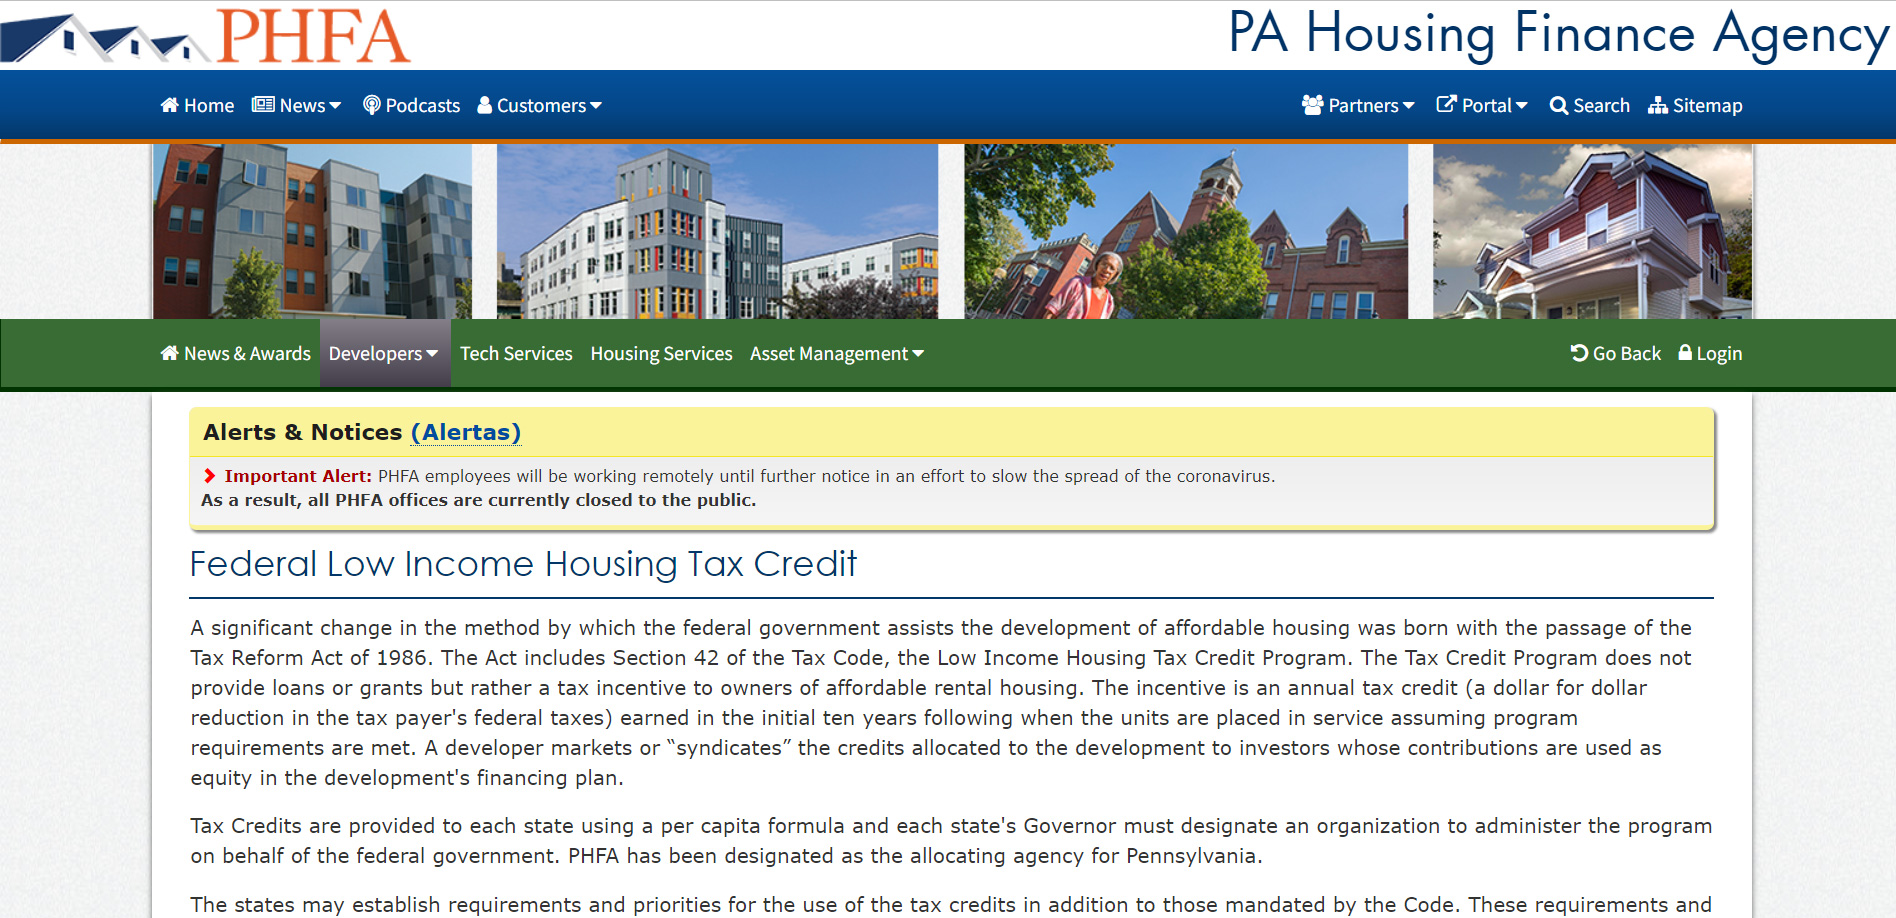 Federal Low Income Housing Tax Credit